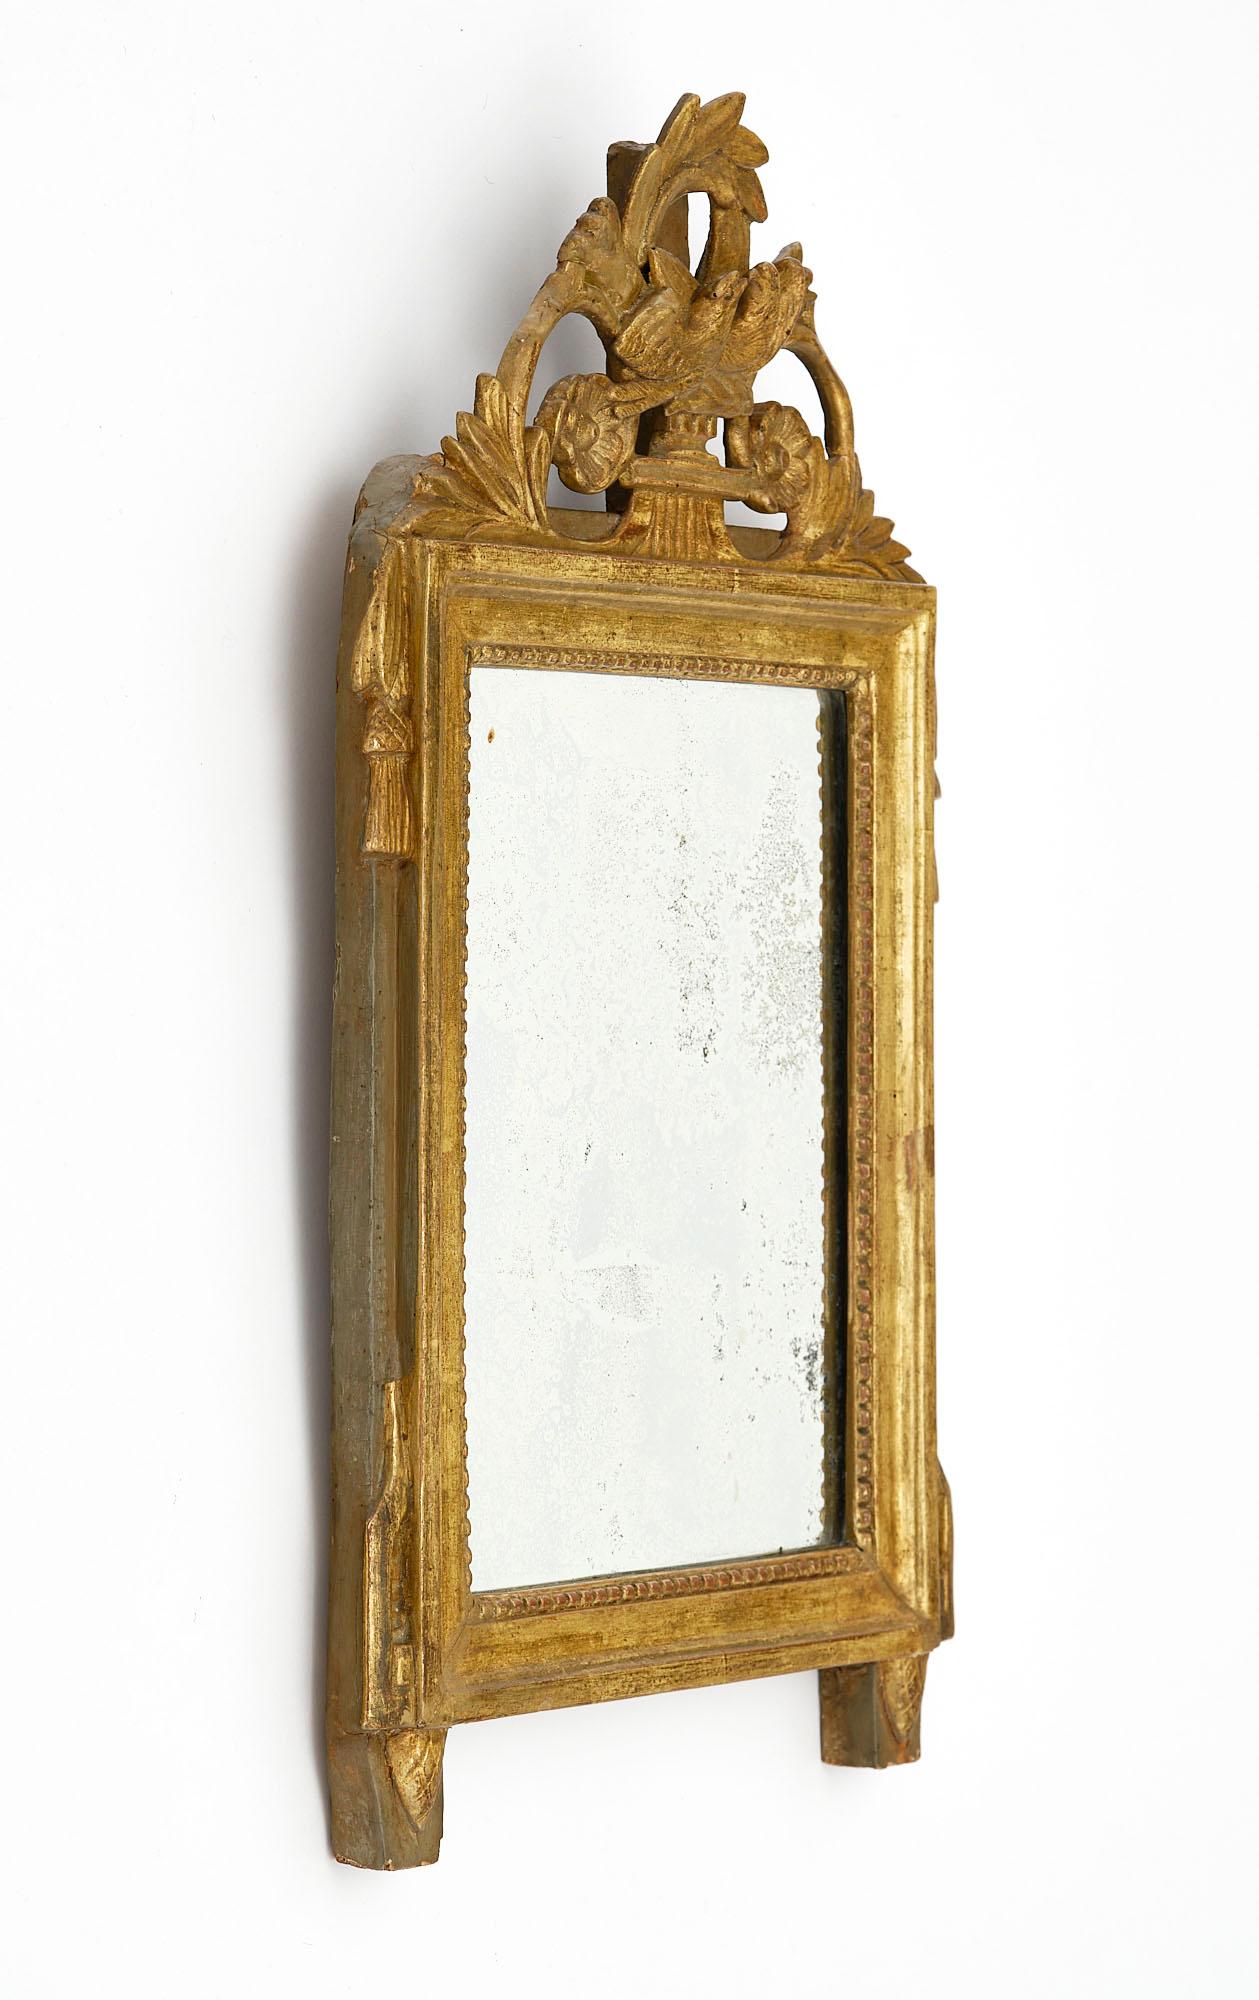 Mirror from France in the Louis XVI period. This piece is made of stuccoed hand-carved wood with a fronton that features birds, floral motifs, and laurel wreath. The 24 carat gold leafing is original, as is the original mercury mirror.